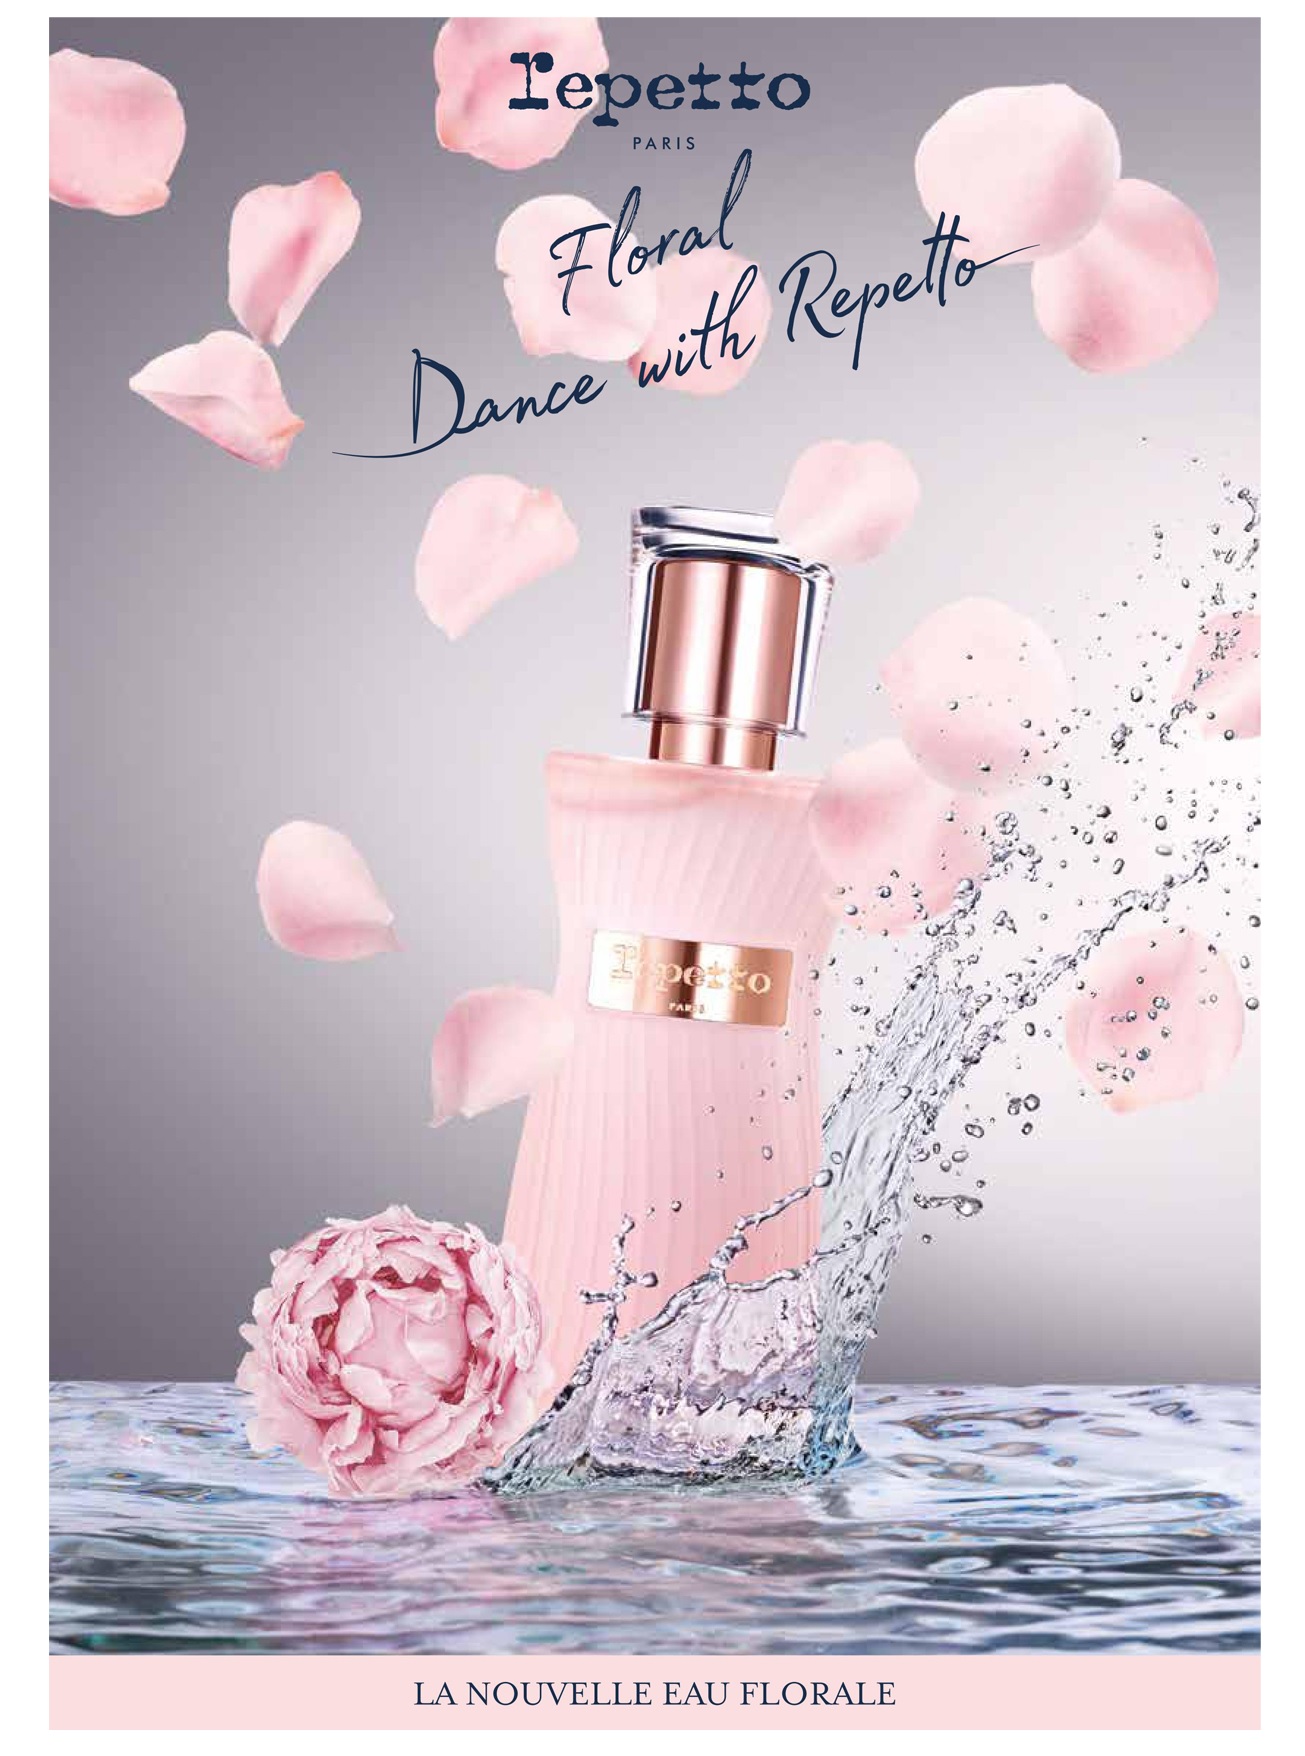 Floral Dance with Repetto